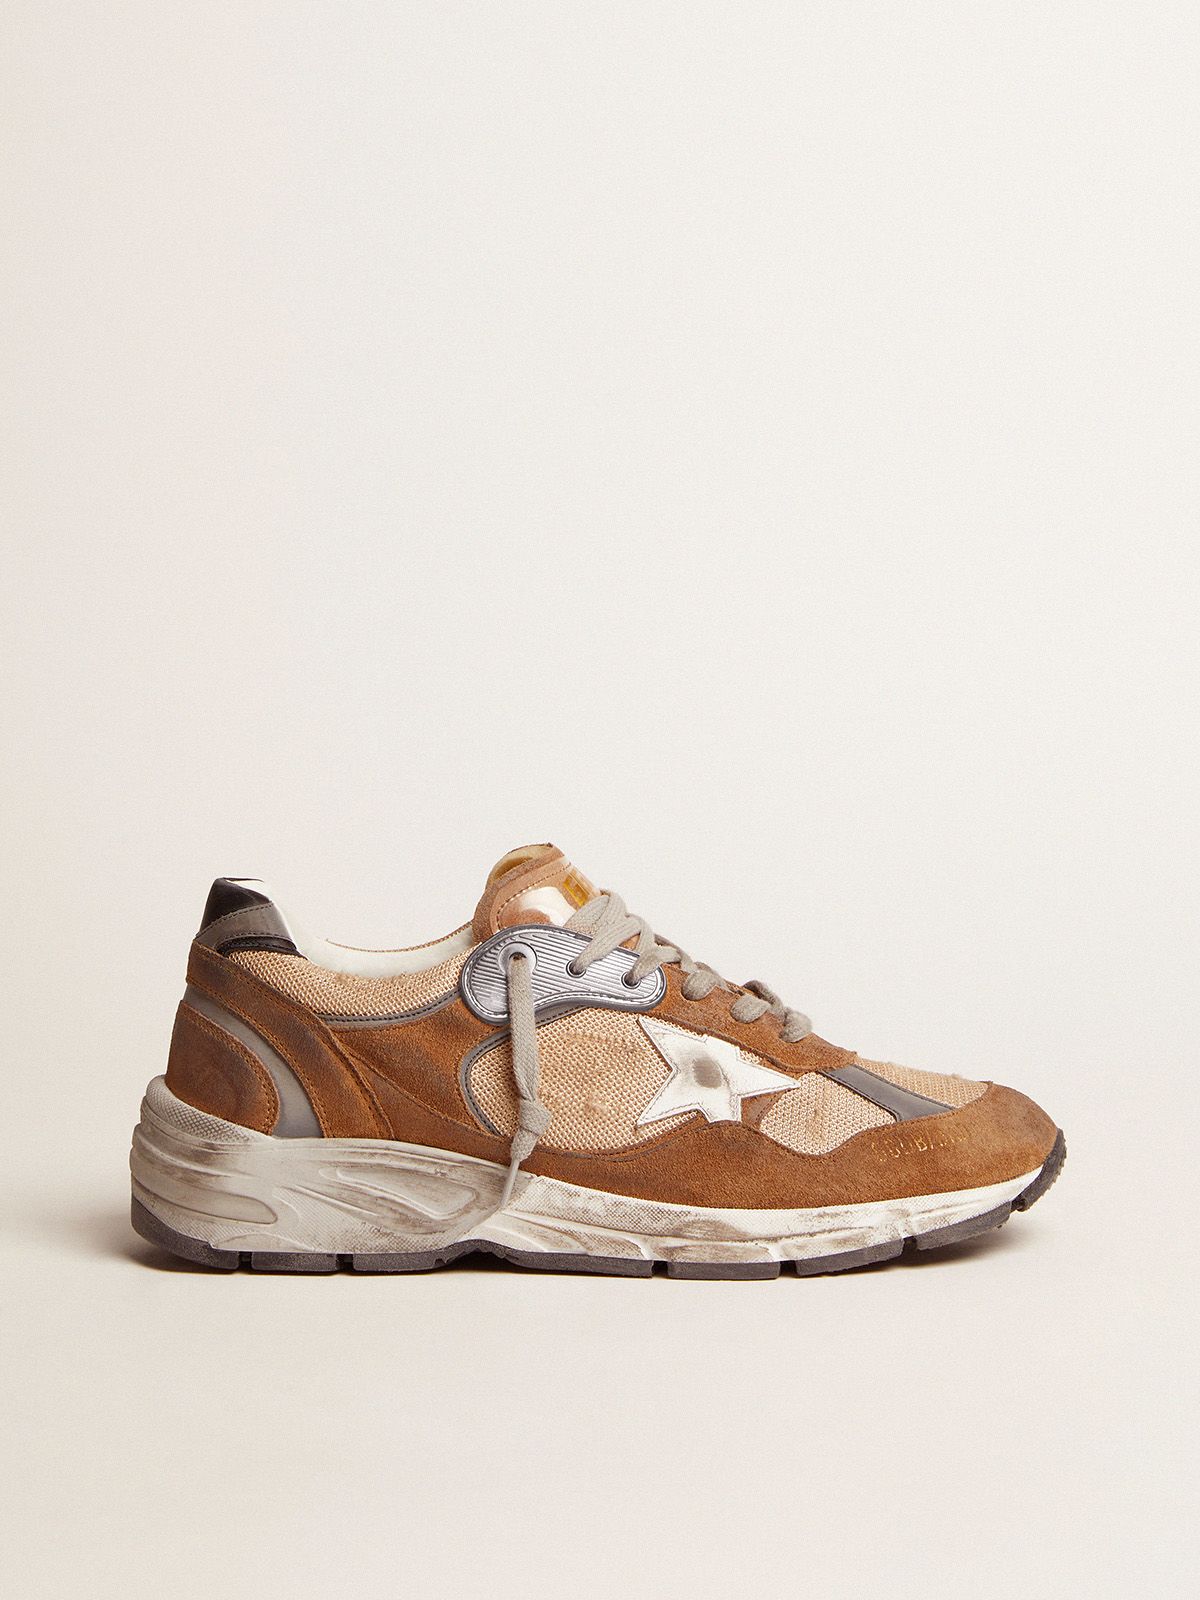 golden goose Dad-Star and mesh leather in with sneakers black heel suede tab star tobacco-colored white